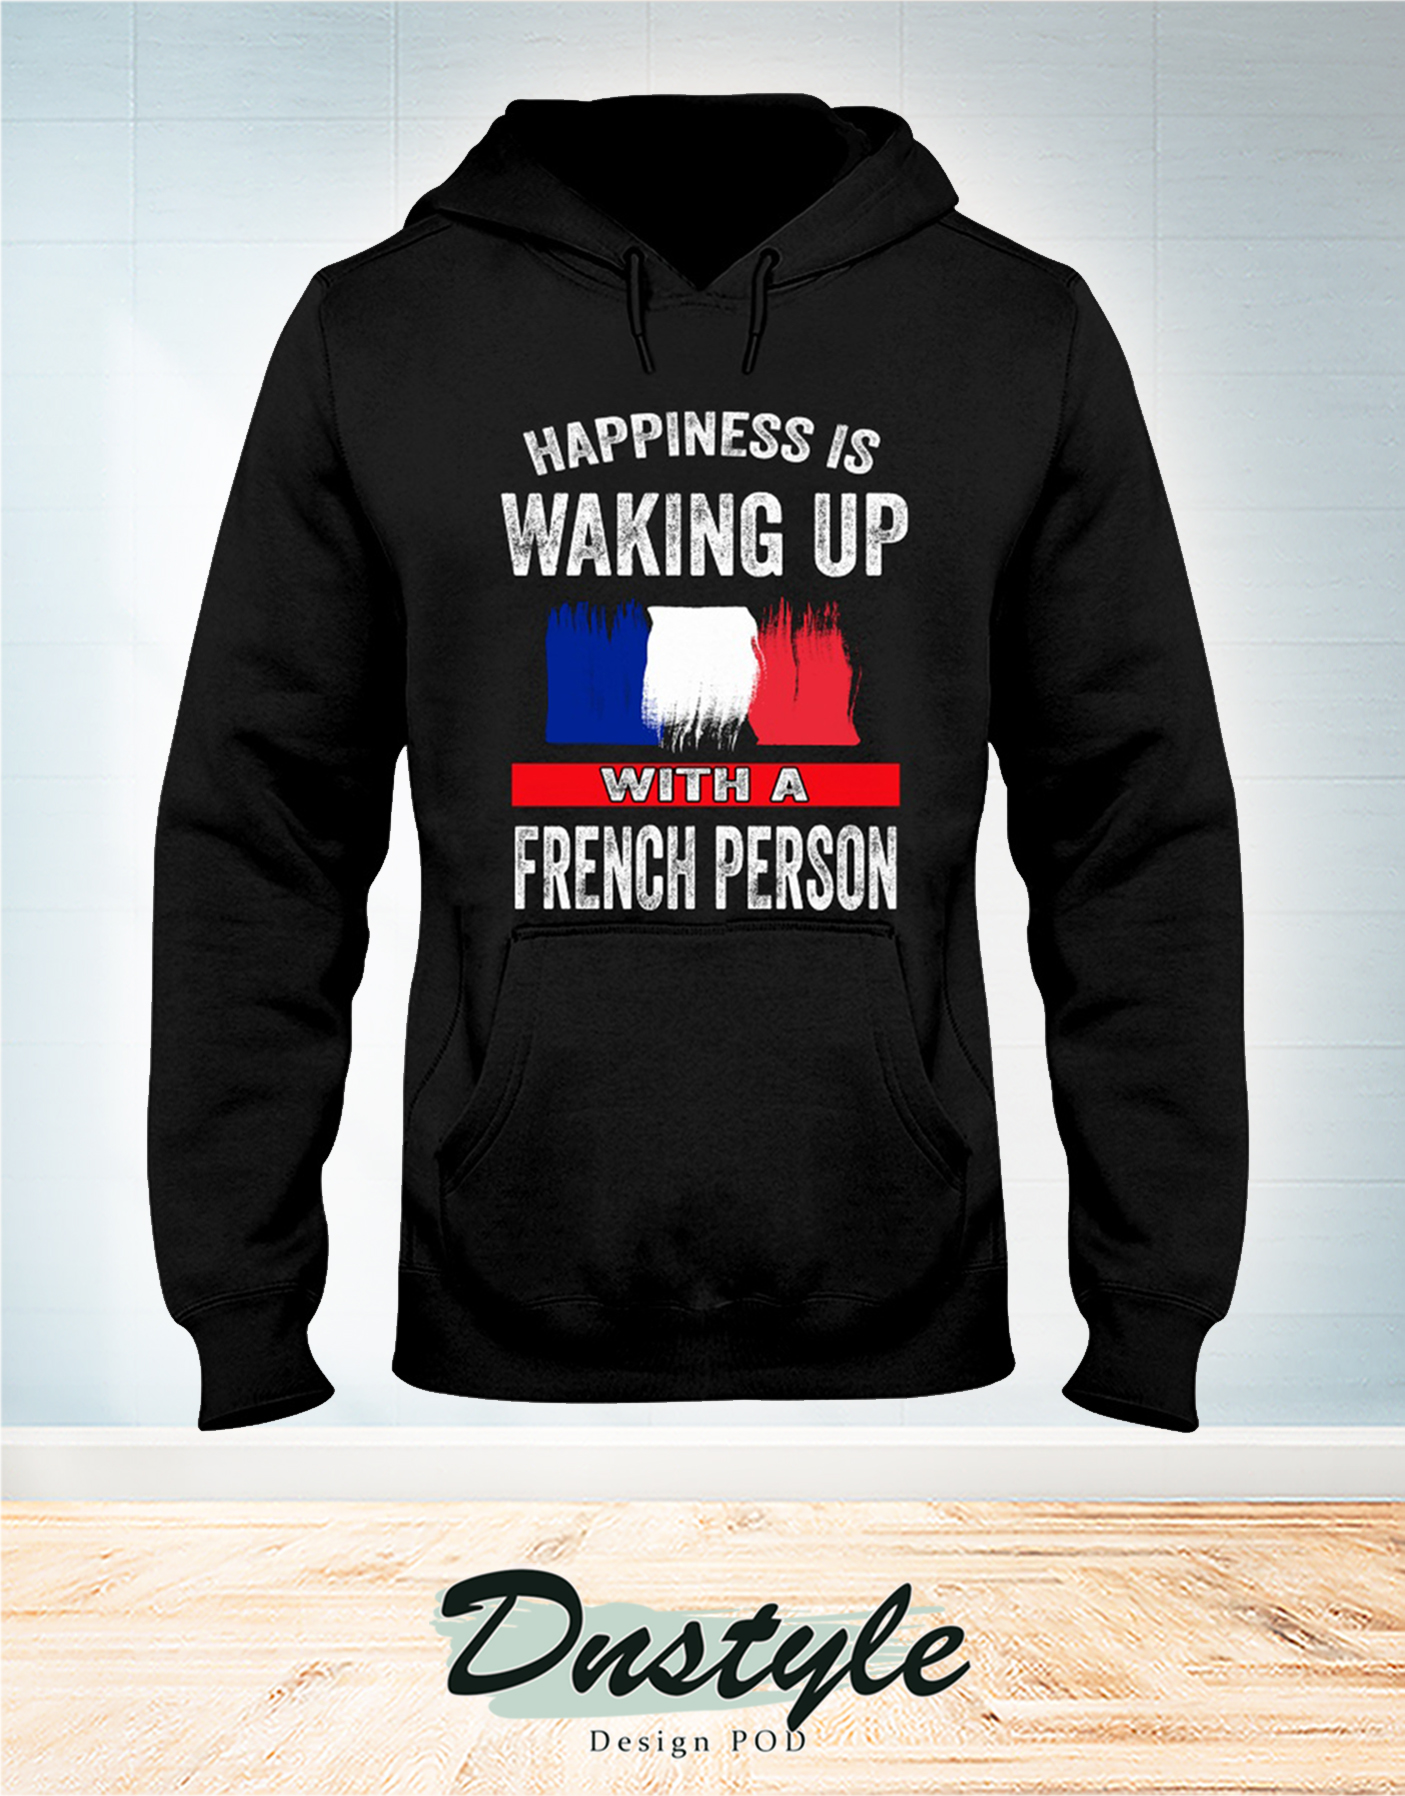 Happiness is waking up with a french person t-shirt